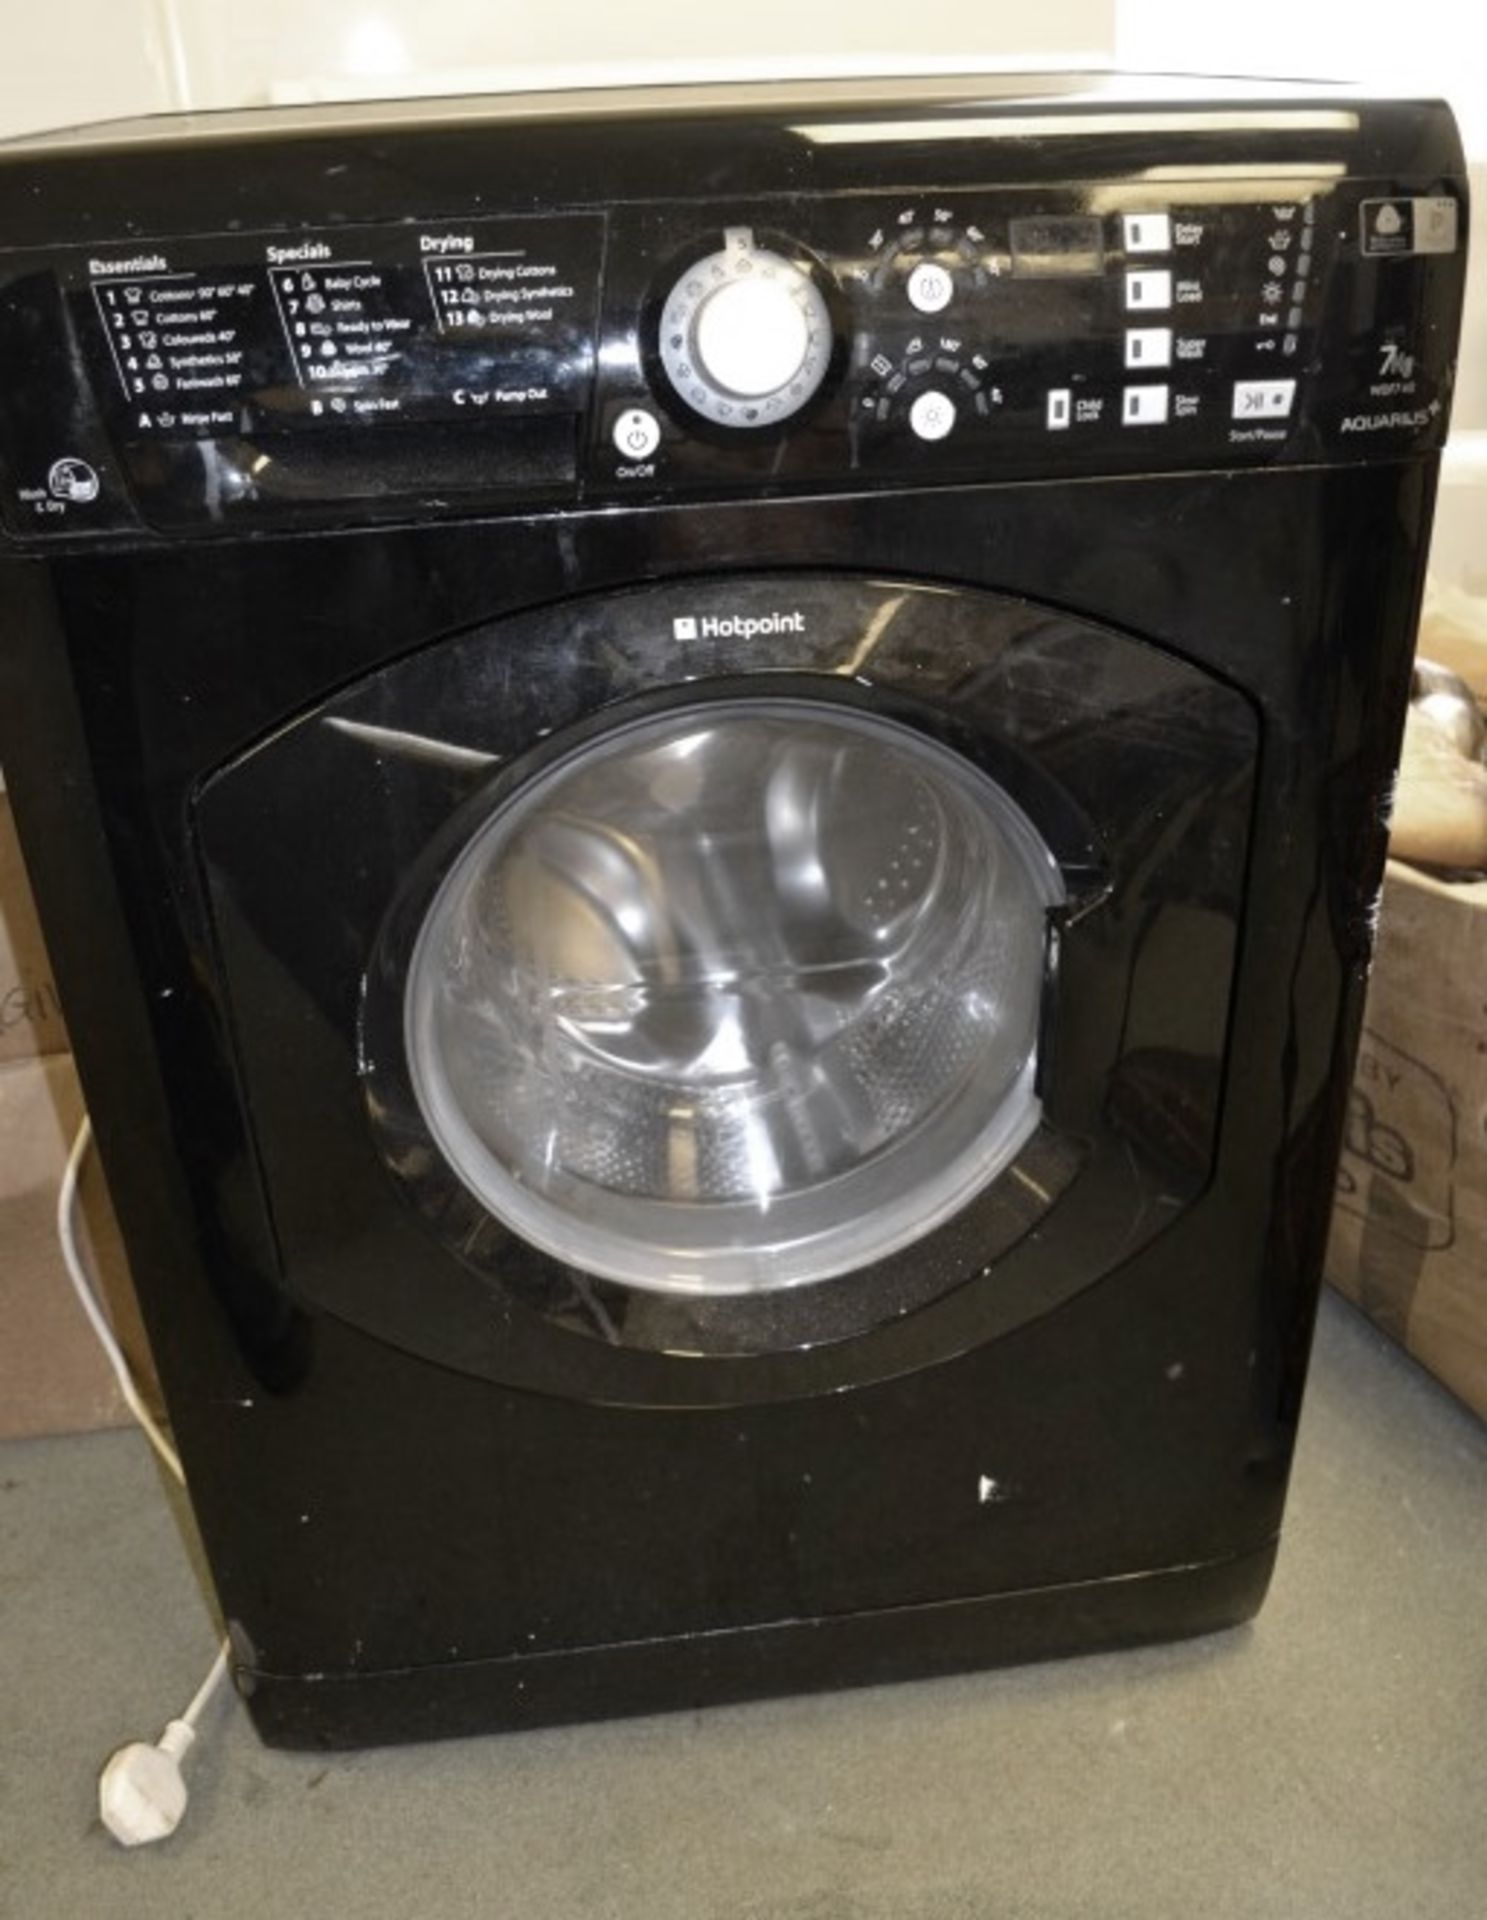 1 x Hotpoint Washing Machine (Model: WDF740 Aquarius) - 7kg Capacity - From A Clean Manor House